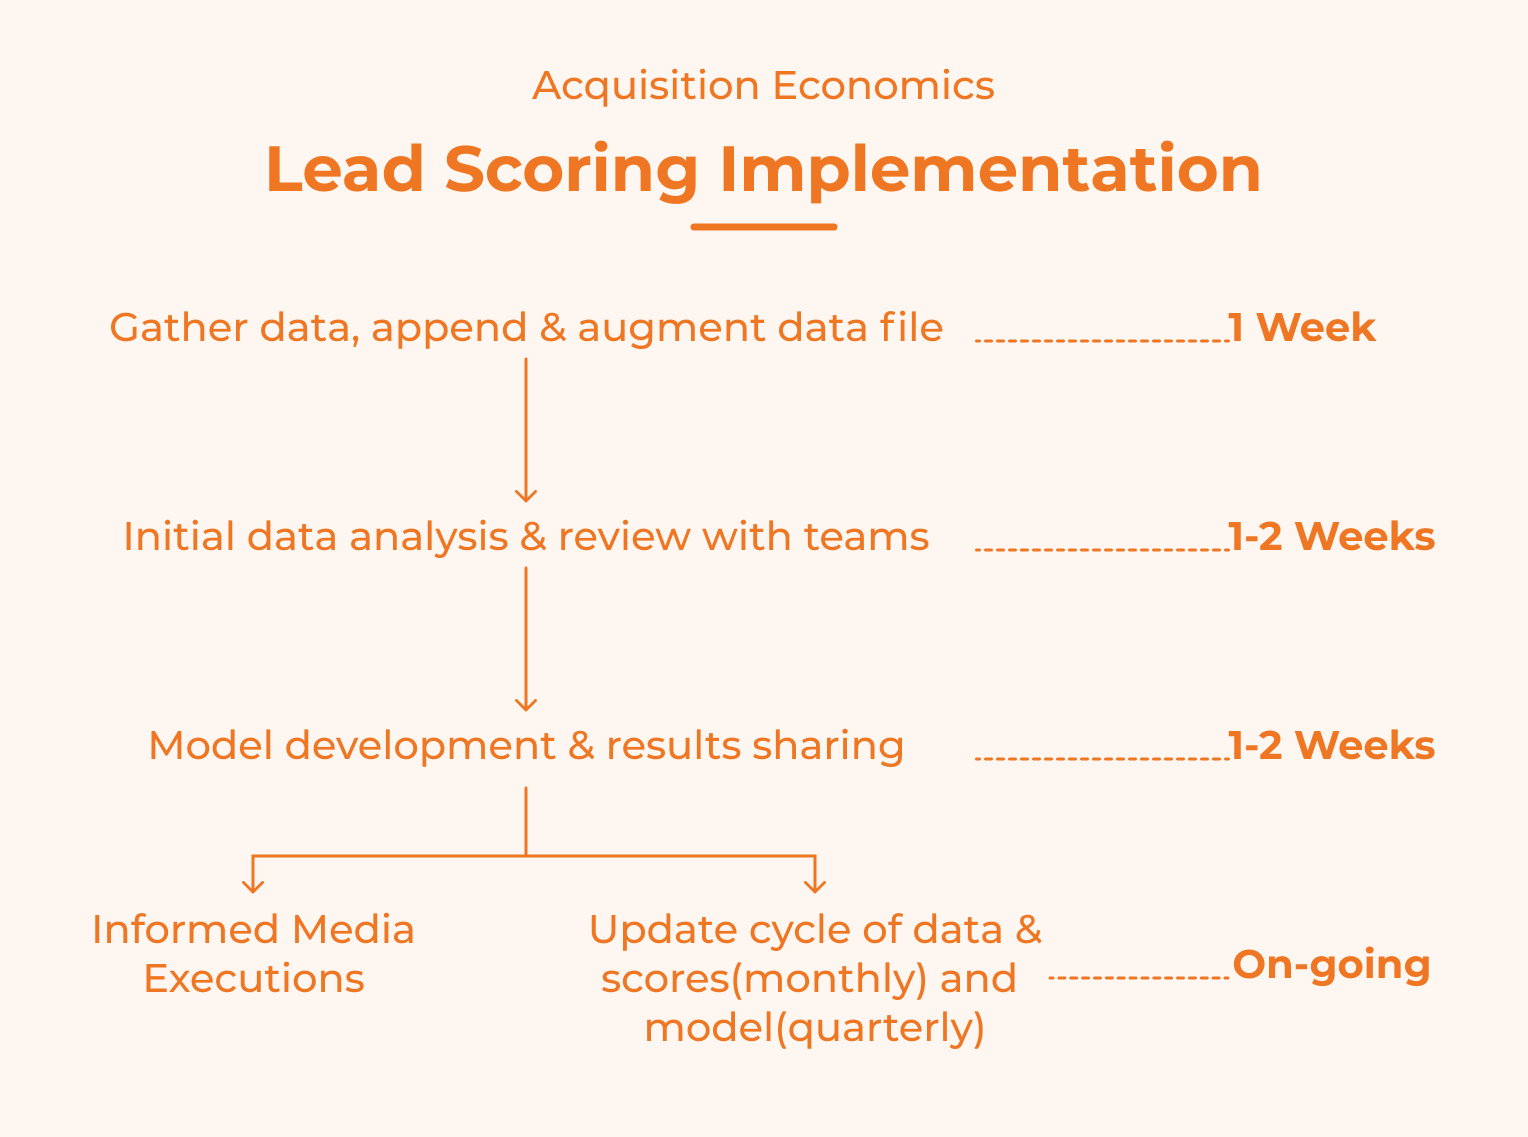 A guide for lead scoring implementation